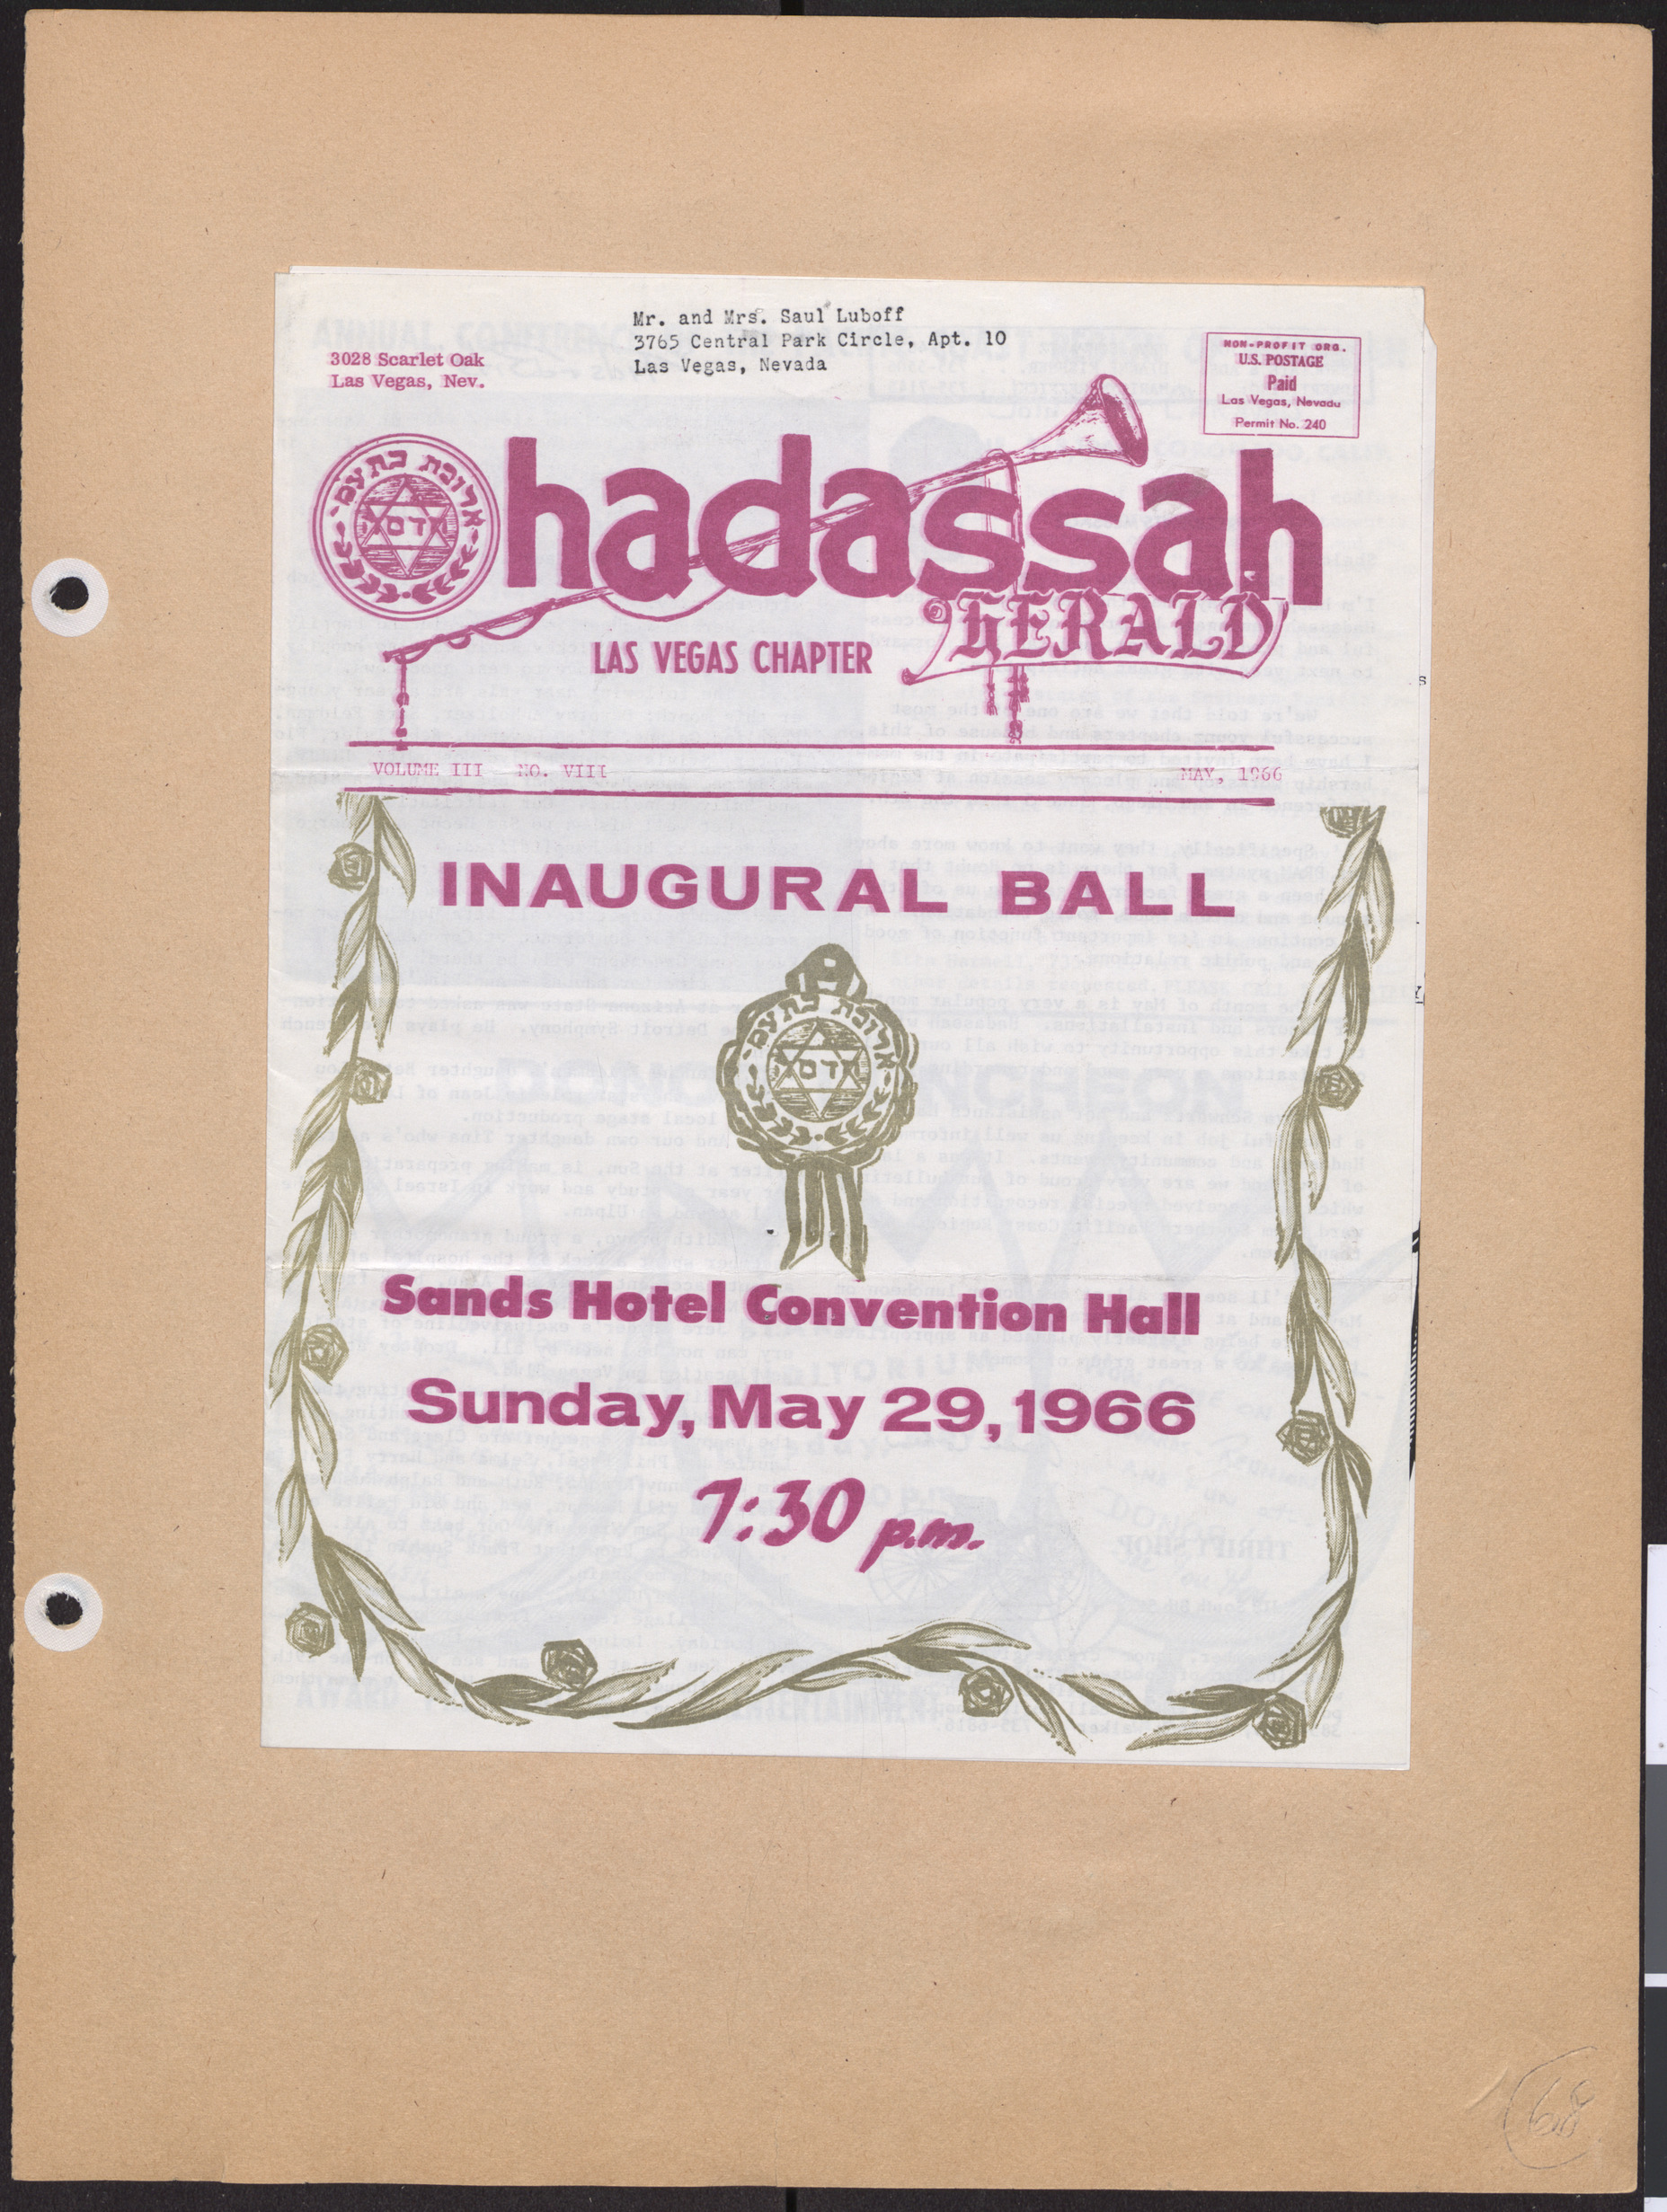 Hadassah Las Vegas Chapter newsletter, May 1966, cover